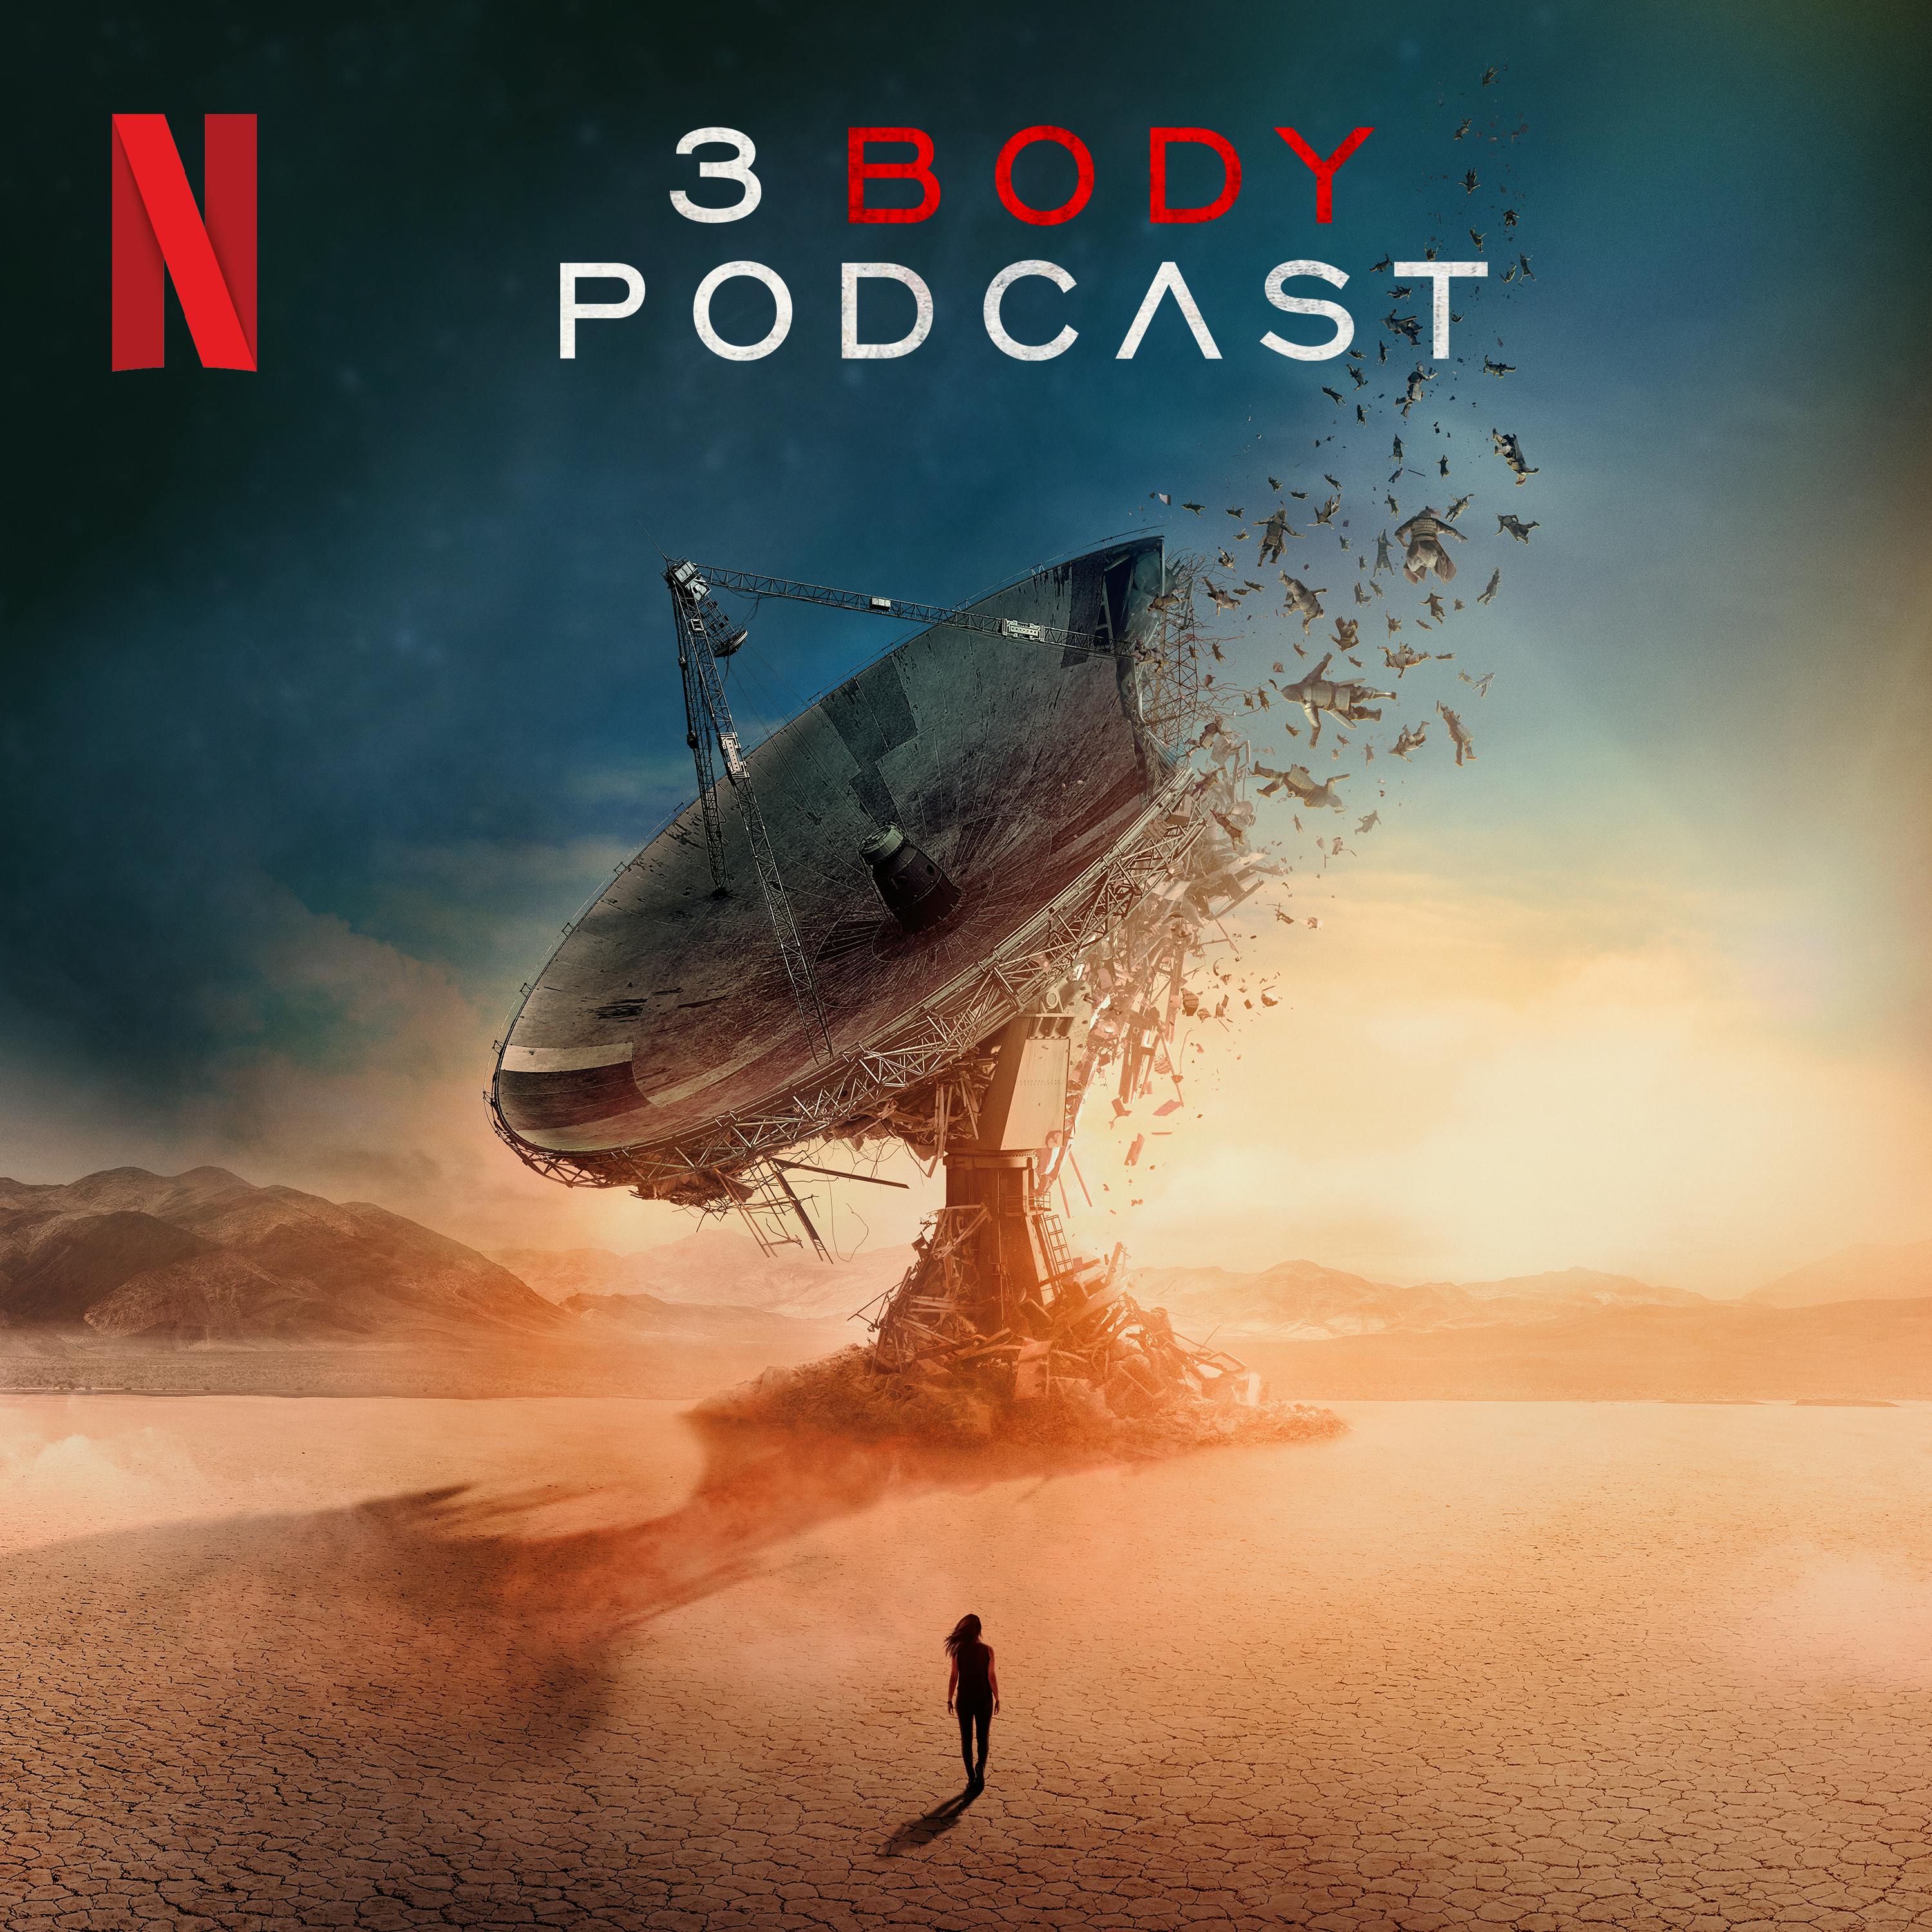 3 Body Podcast podcast show image